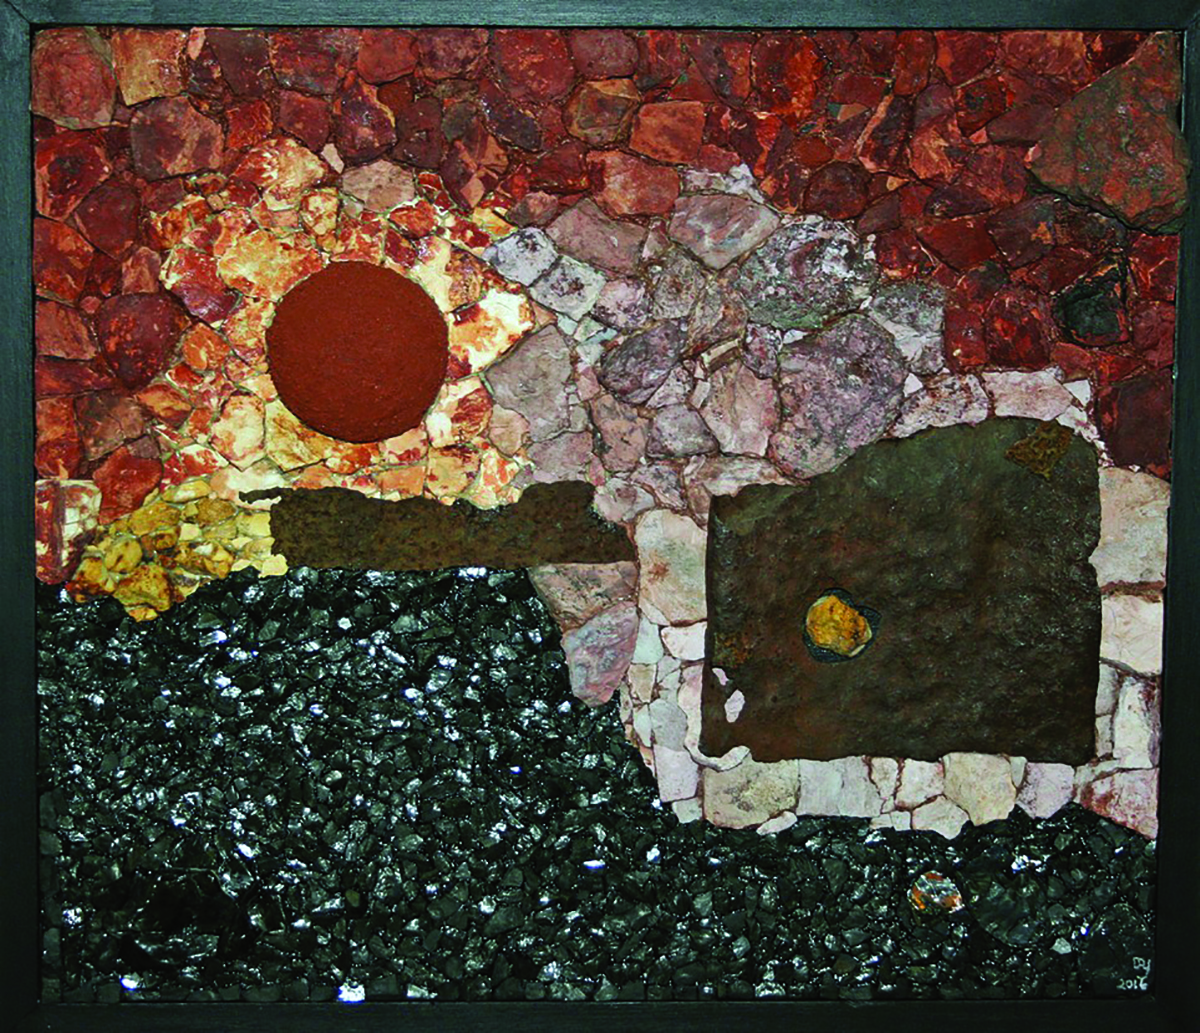 “Marvine Sunset” (mixed media) is among the works of Scranton native Denis Yanashot, who uses coal silt, burnt ash and scrap metal from abandoned coal processing plants to create pieces of art, which will be featured in a First Fridays public reception on Oct. 6, from 6 to 8 p.m. at The University of Scranton’s Hope Horn Gallery.